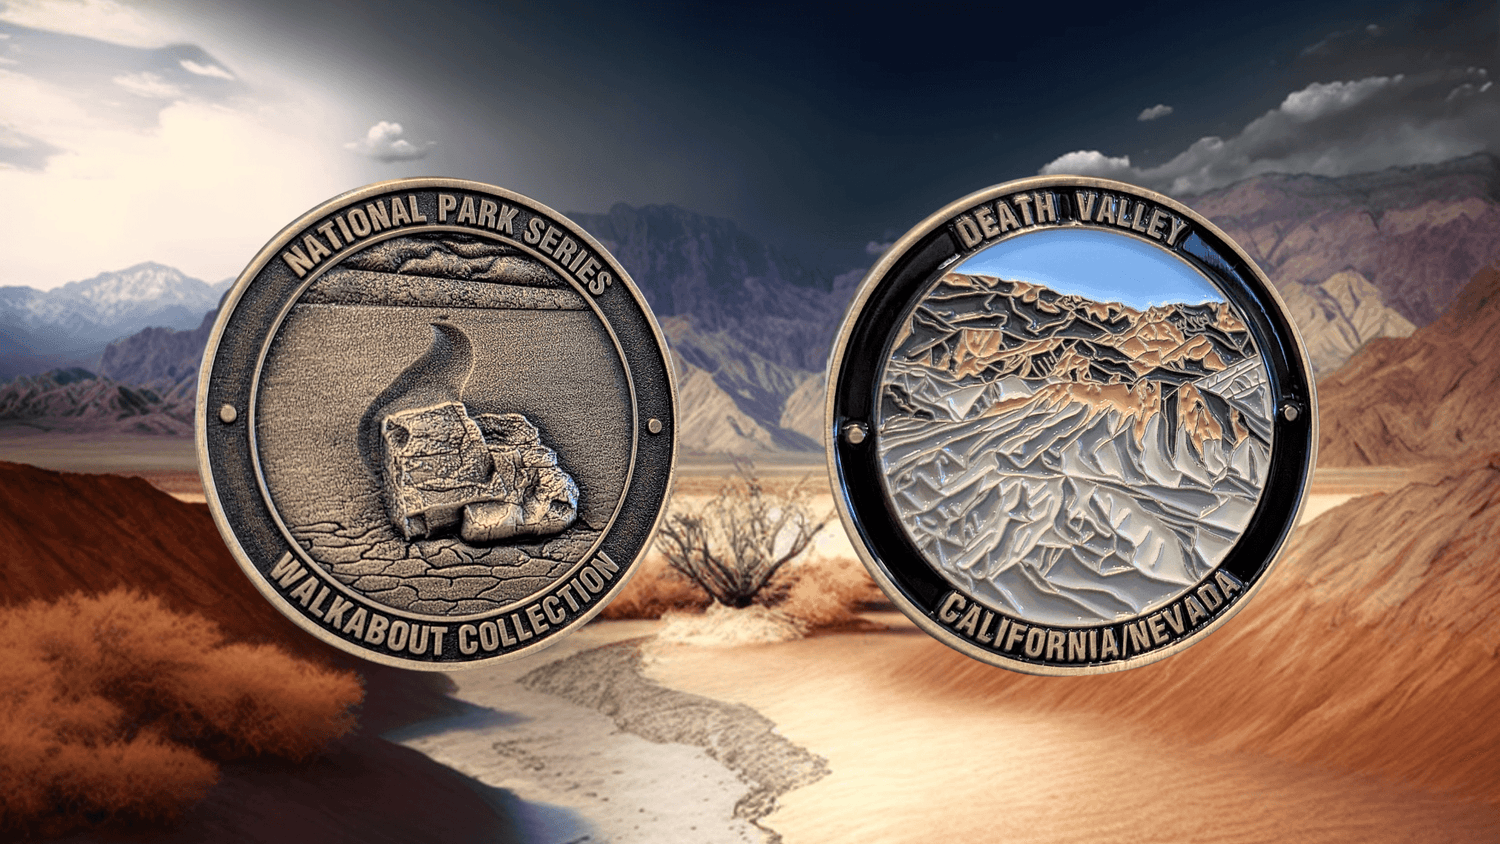 DEATH VALLEY NATIONAL PARK CHALLENGE COIN